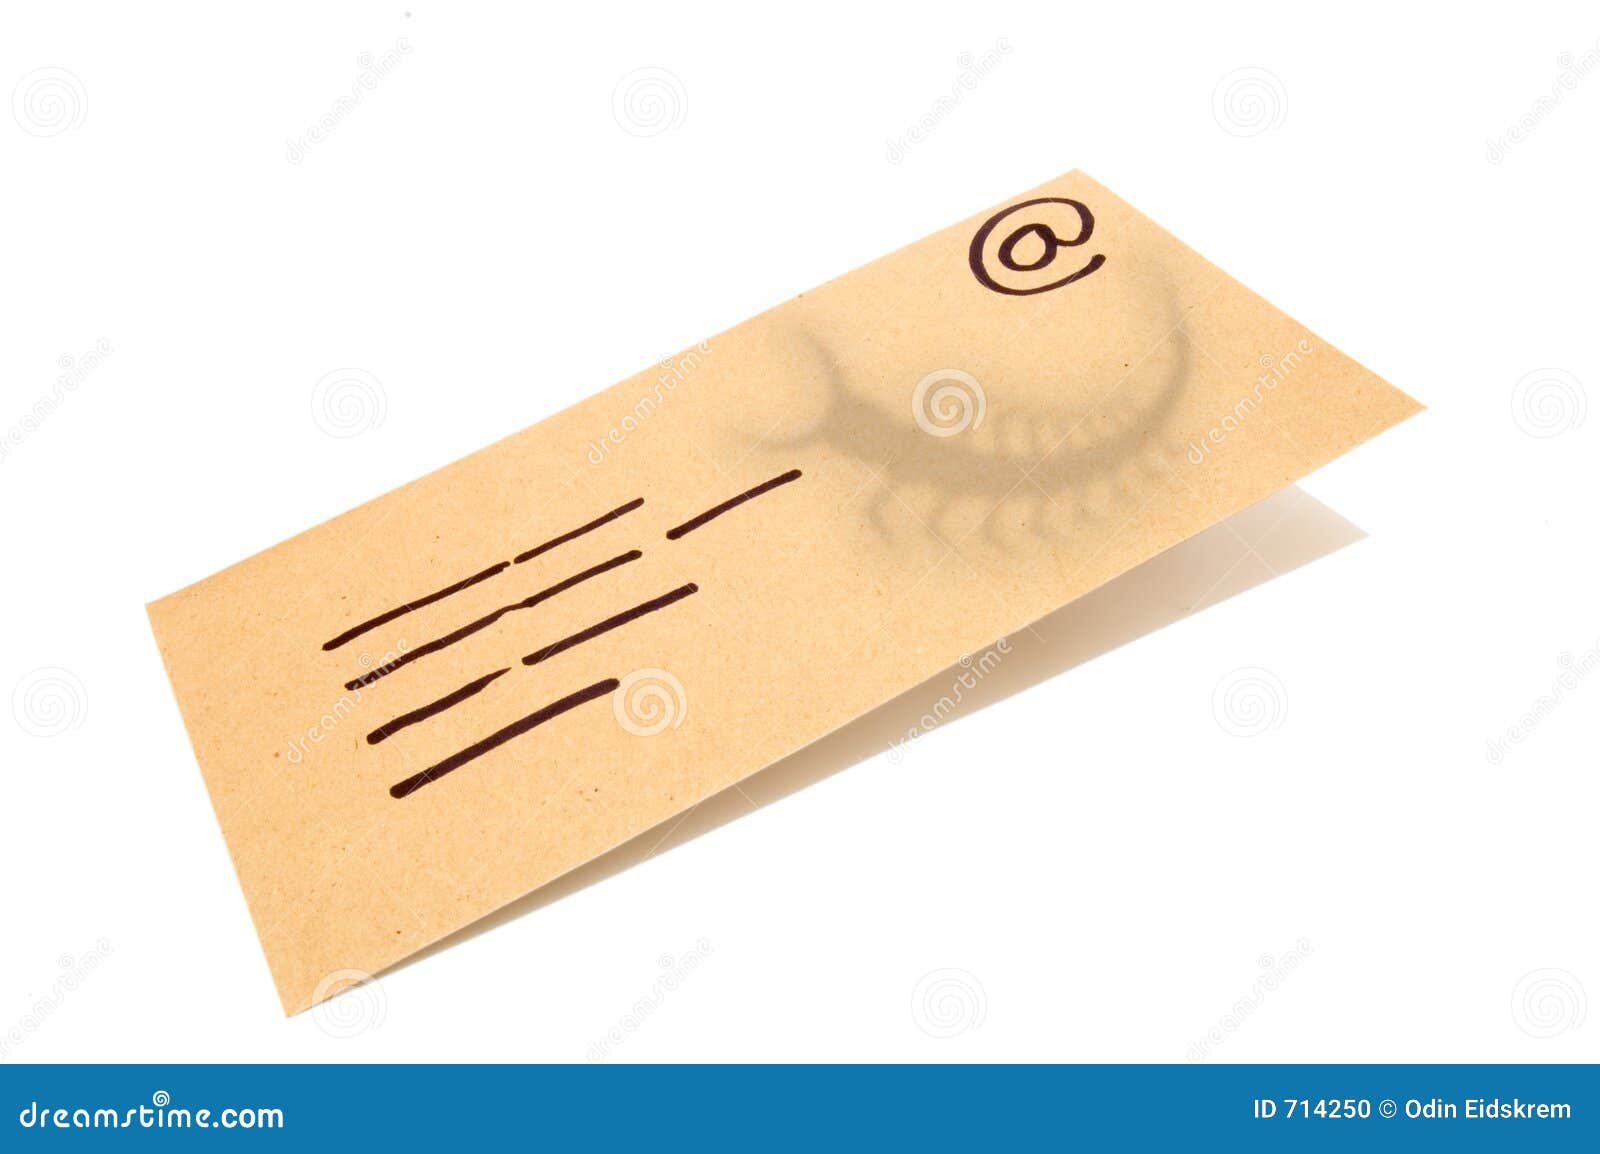 envelope, concept for email with a virus infected attachment.